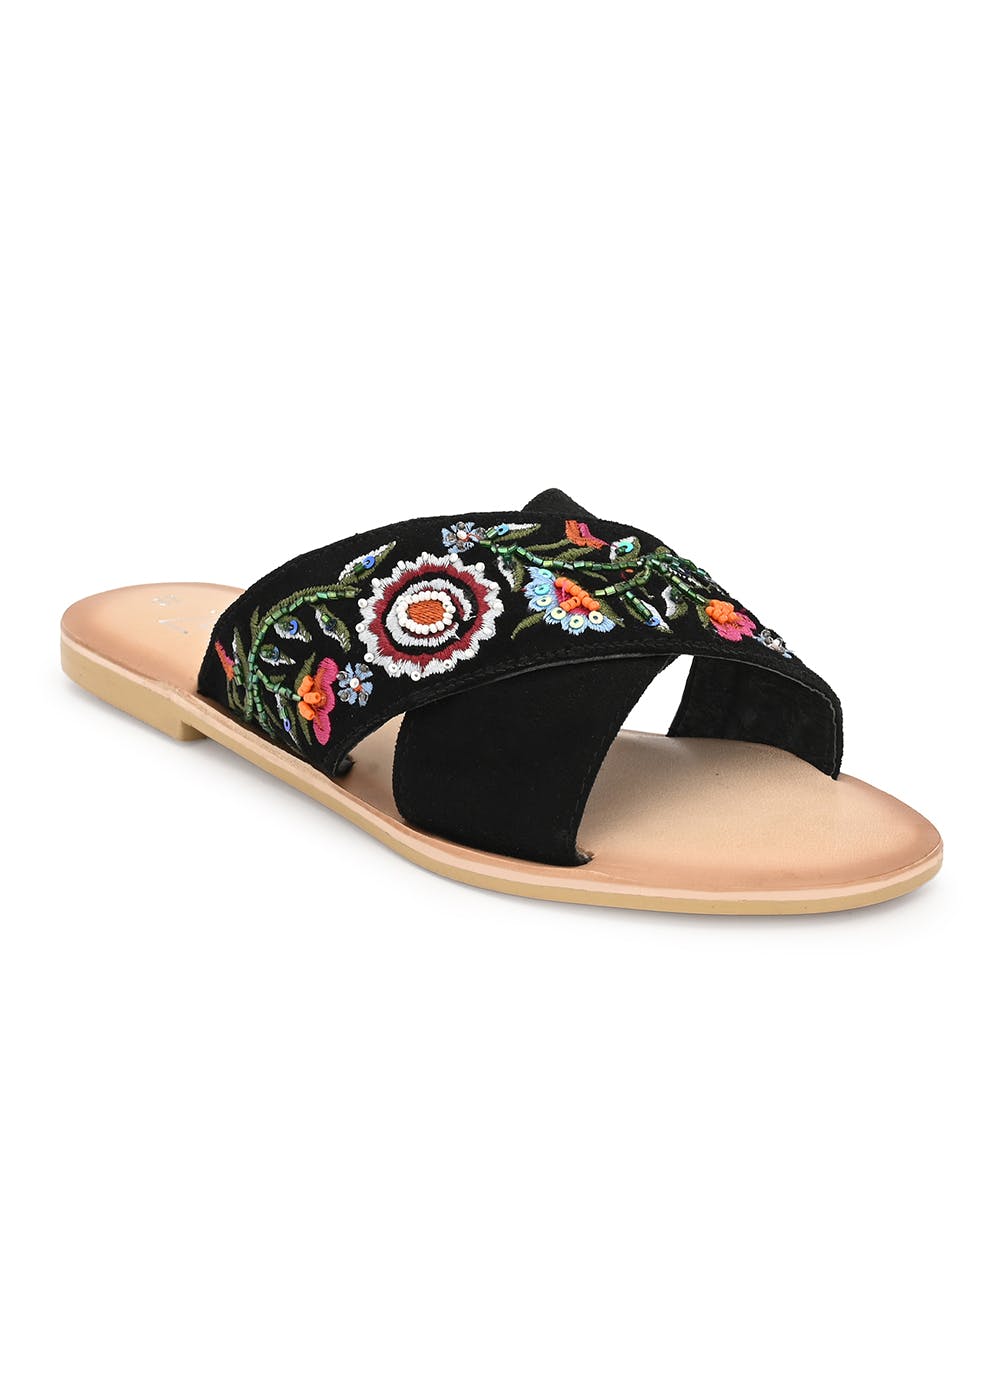 Embroidered Cross Strapped Slides